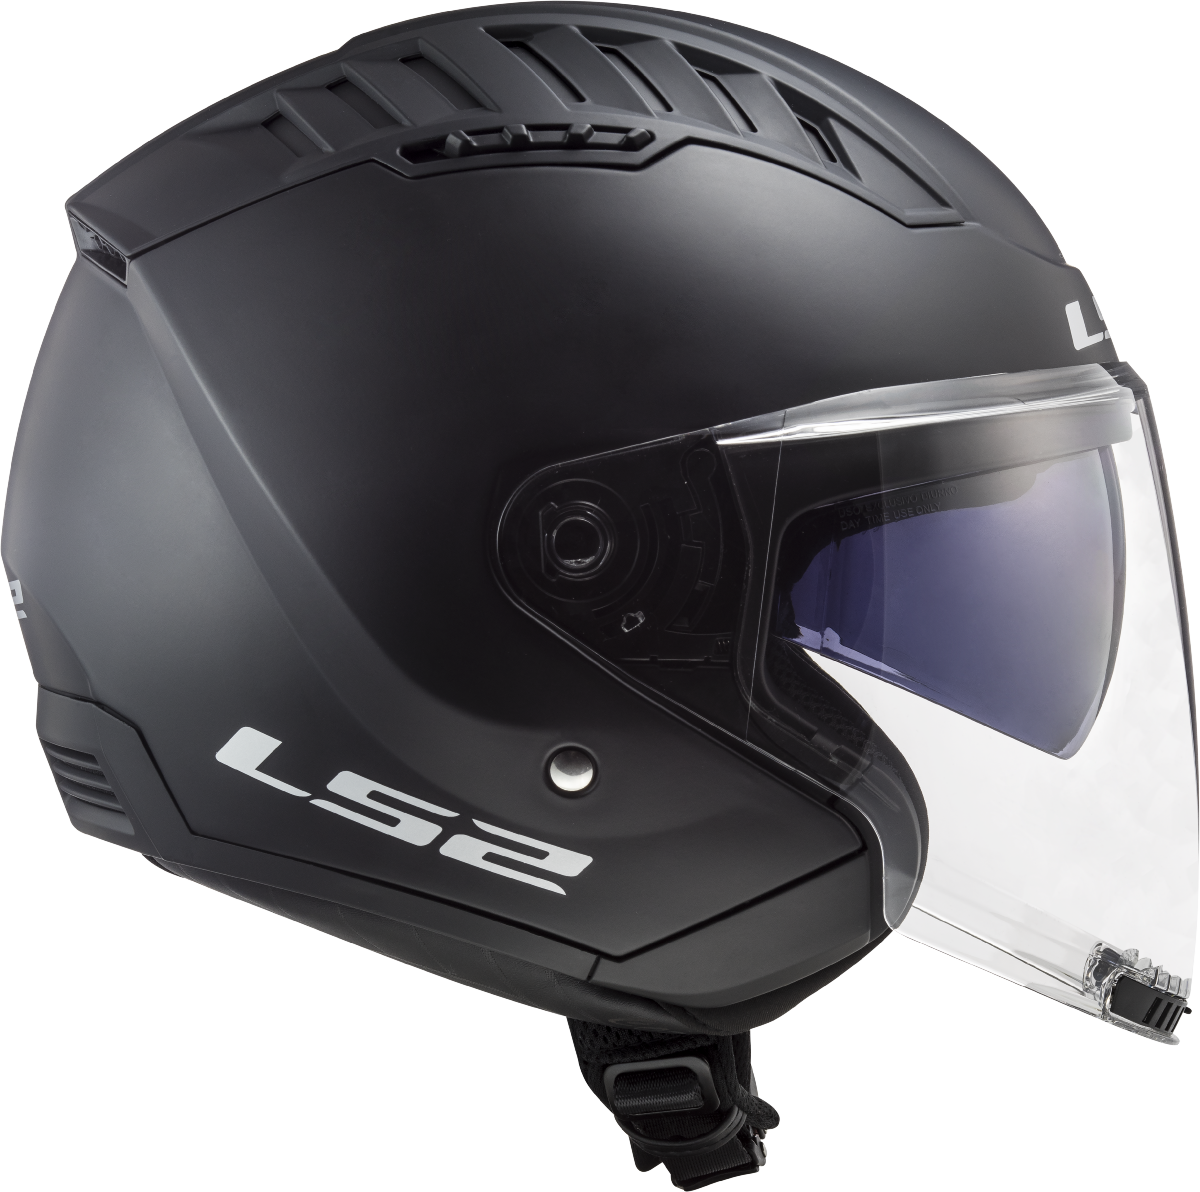 Casco LS2 OF600 COPTER SOLID NEGRO MATE 1